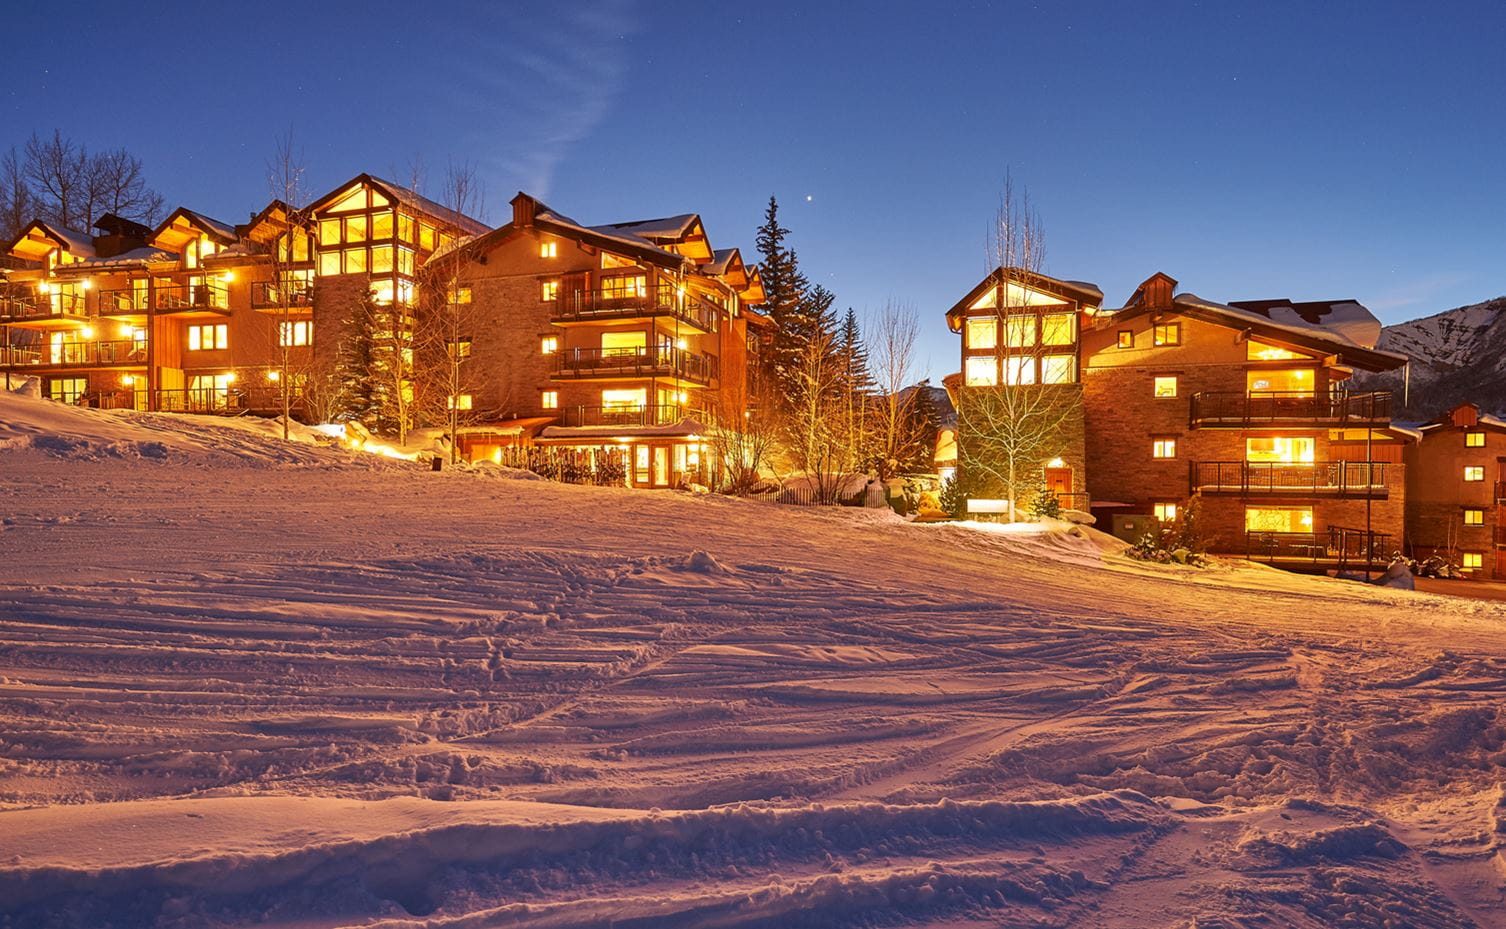 Crestwood Condominiums, slopeside, in Snowmass Village, CO